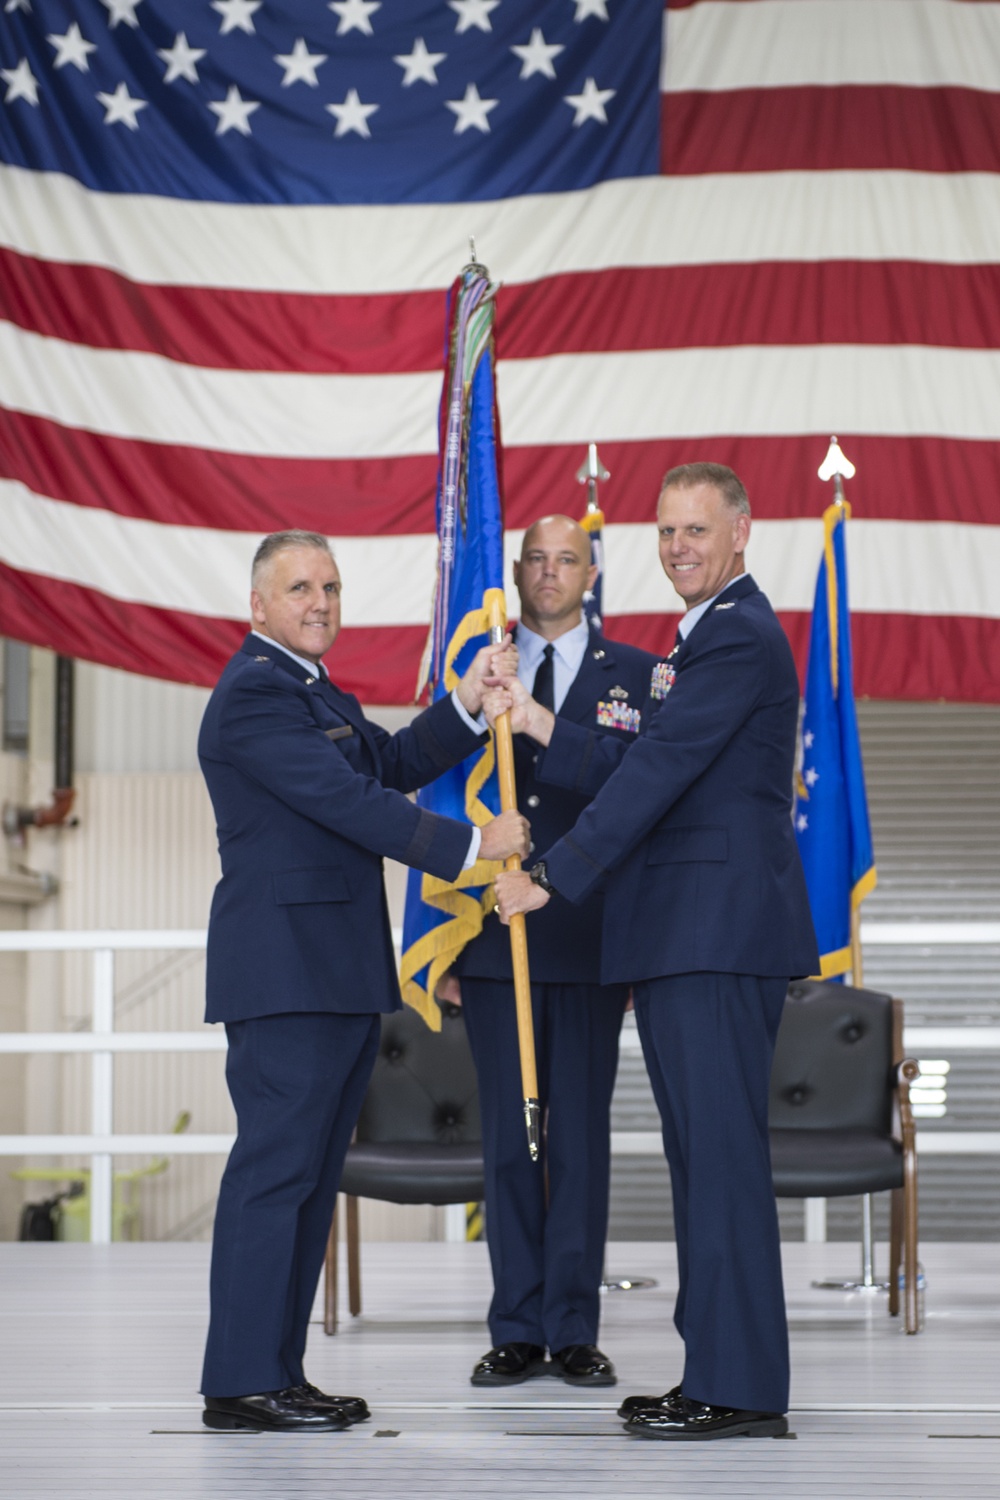 Col. Shaw takes command of the Hoosier Wing